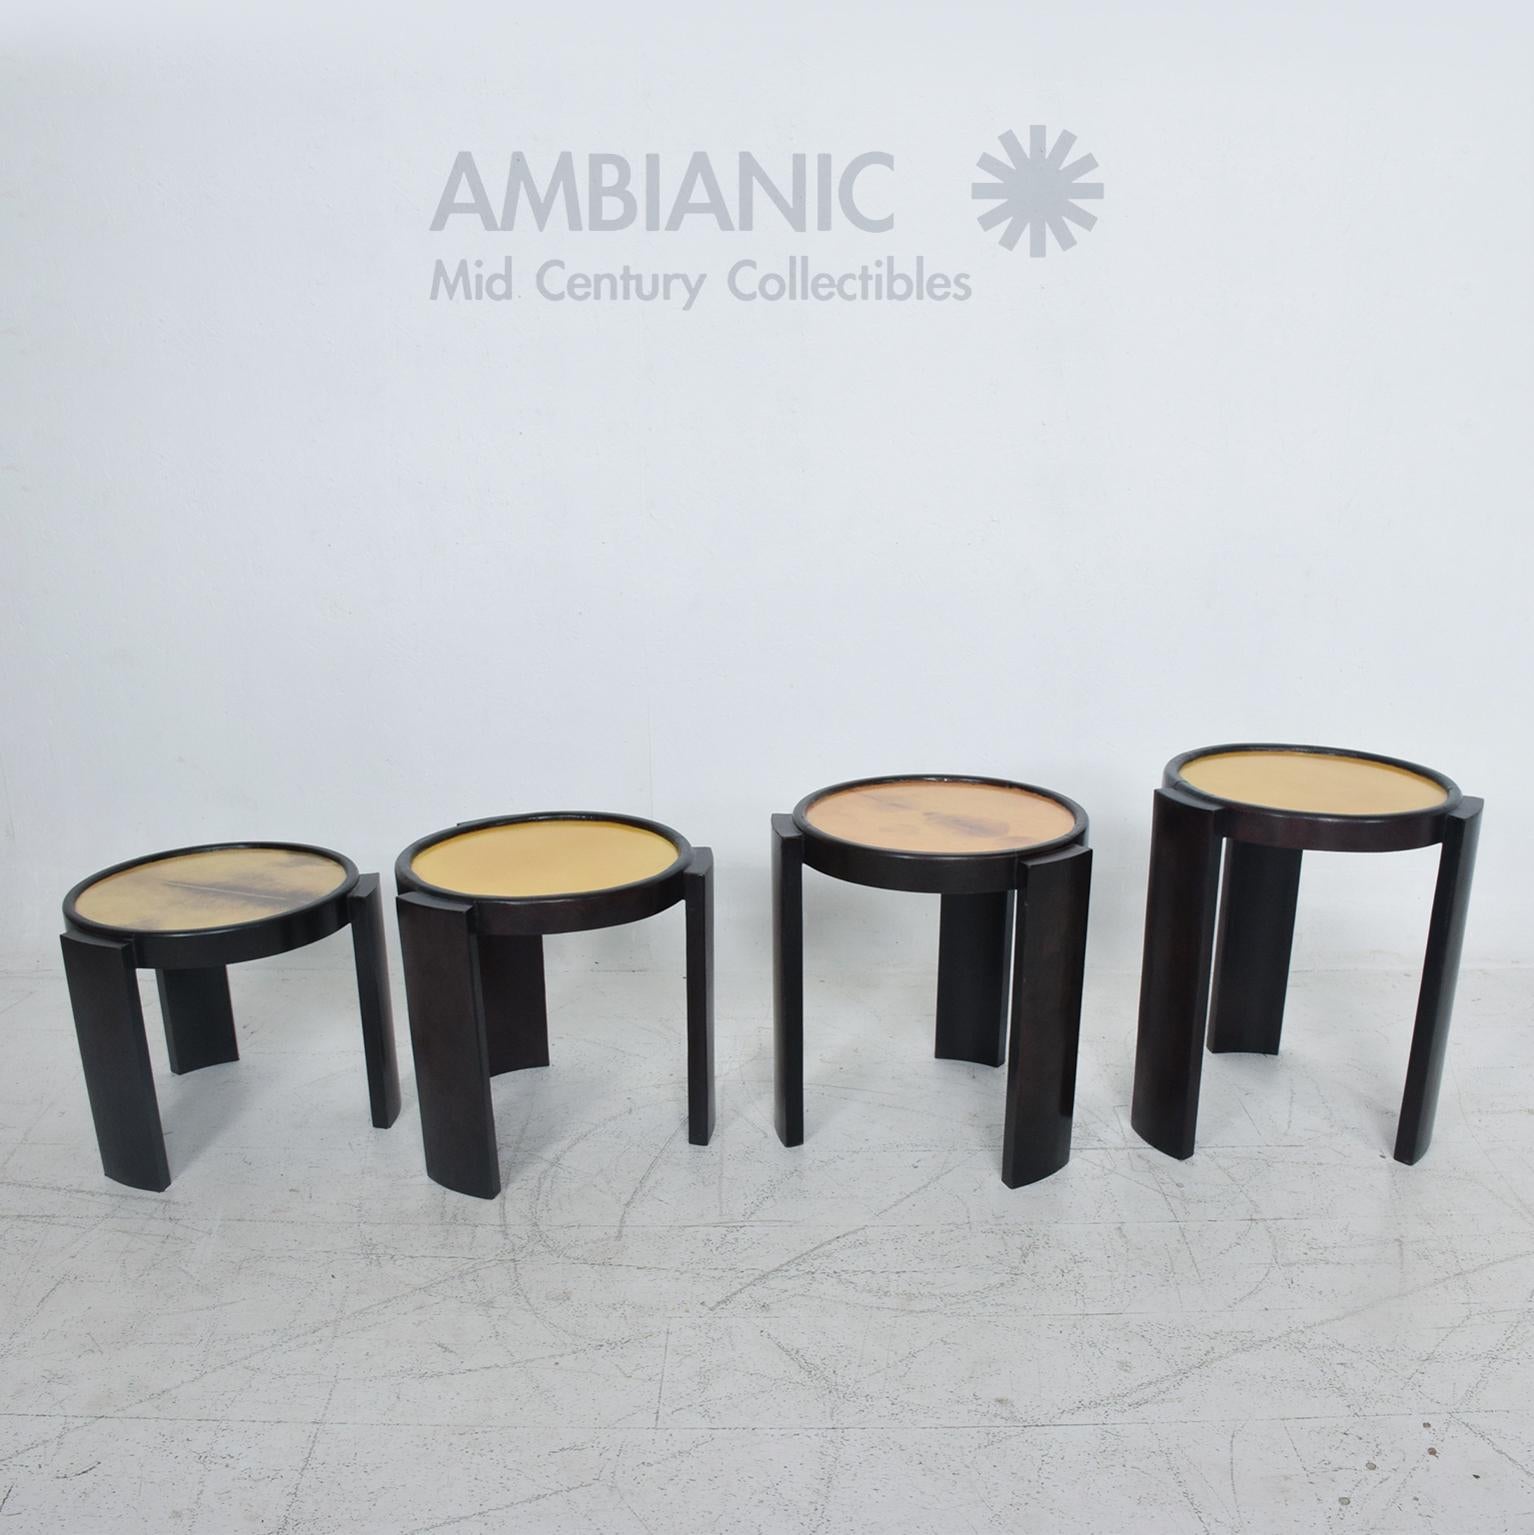 Mid-Century Modern 1950s Four Nesting Tables Goatskin and Leather Escudero Mexican Modernism